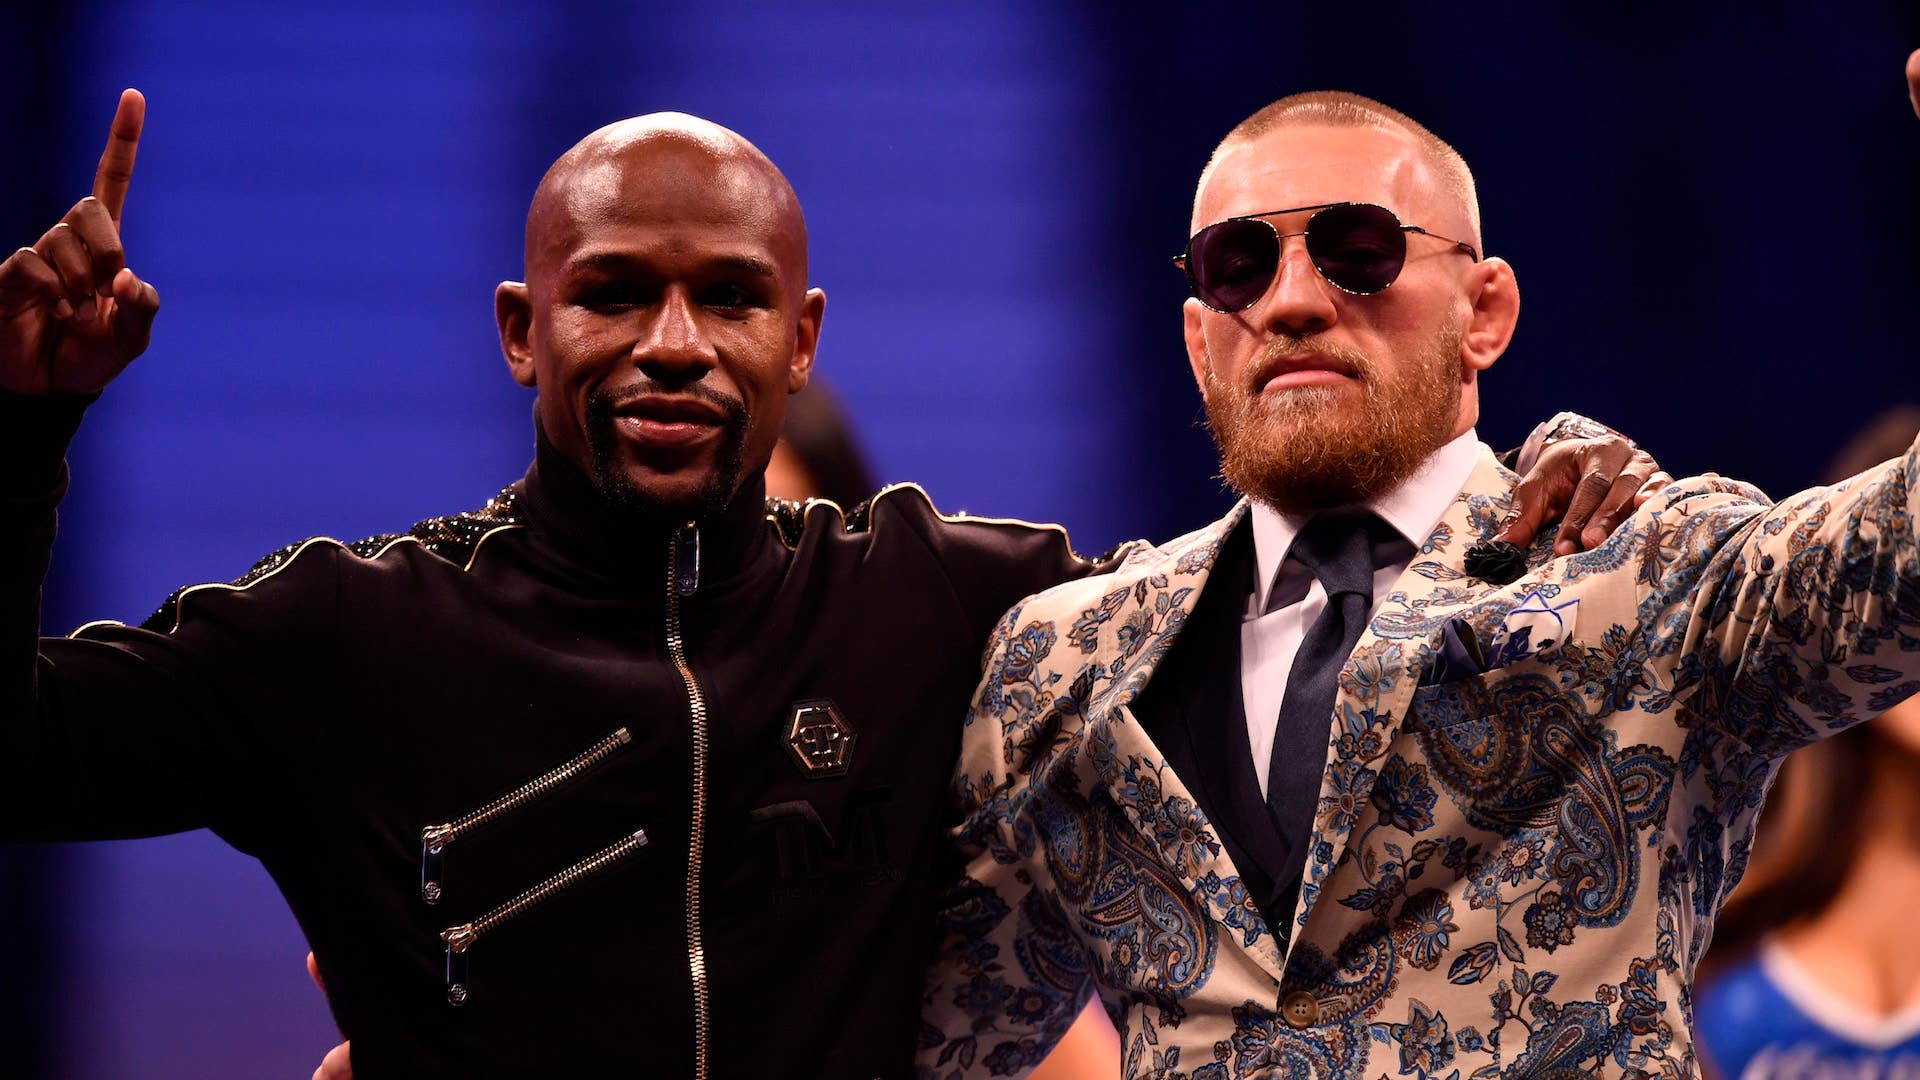 Floyd Mayweather Jr. and Conor McGregor pose for pictures